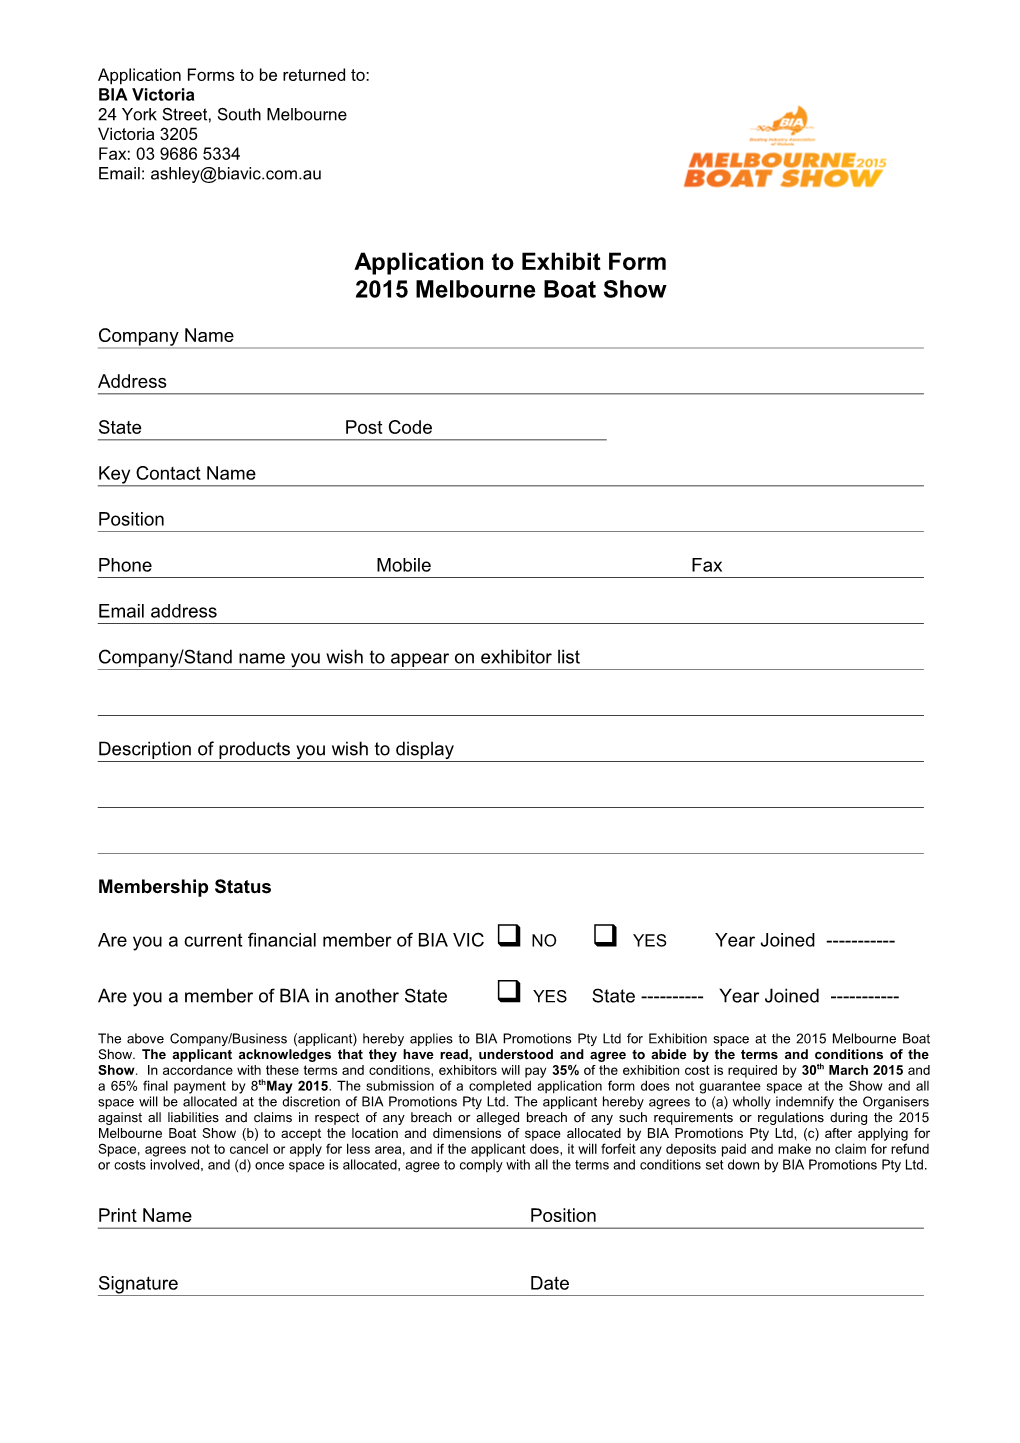 Application to Exhibit Form